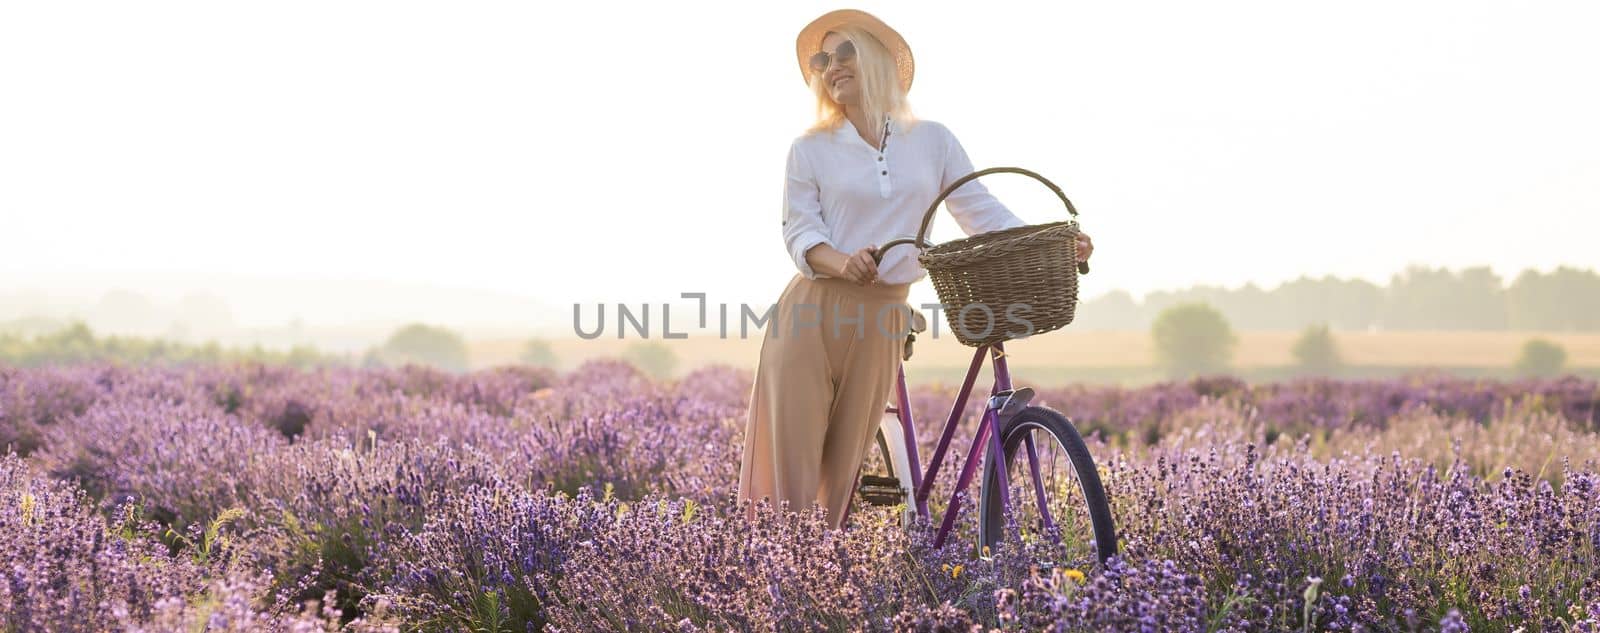 Beautiful young healthy woman with a white dress running joyfully through a lavender field holding a straw hat under the rays of the setting sun.